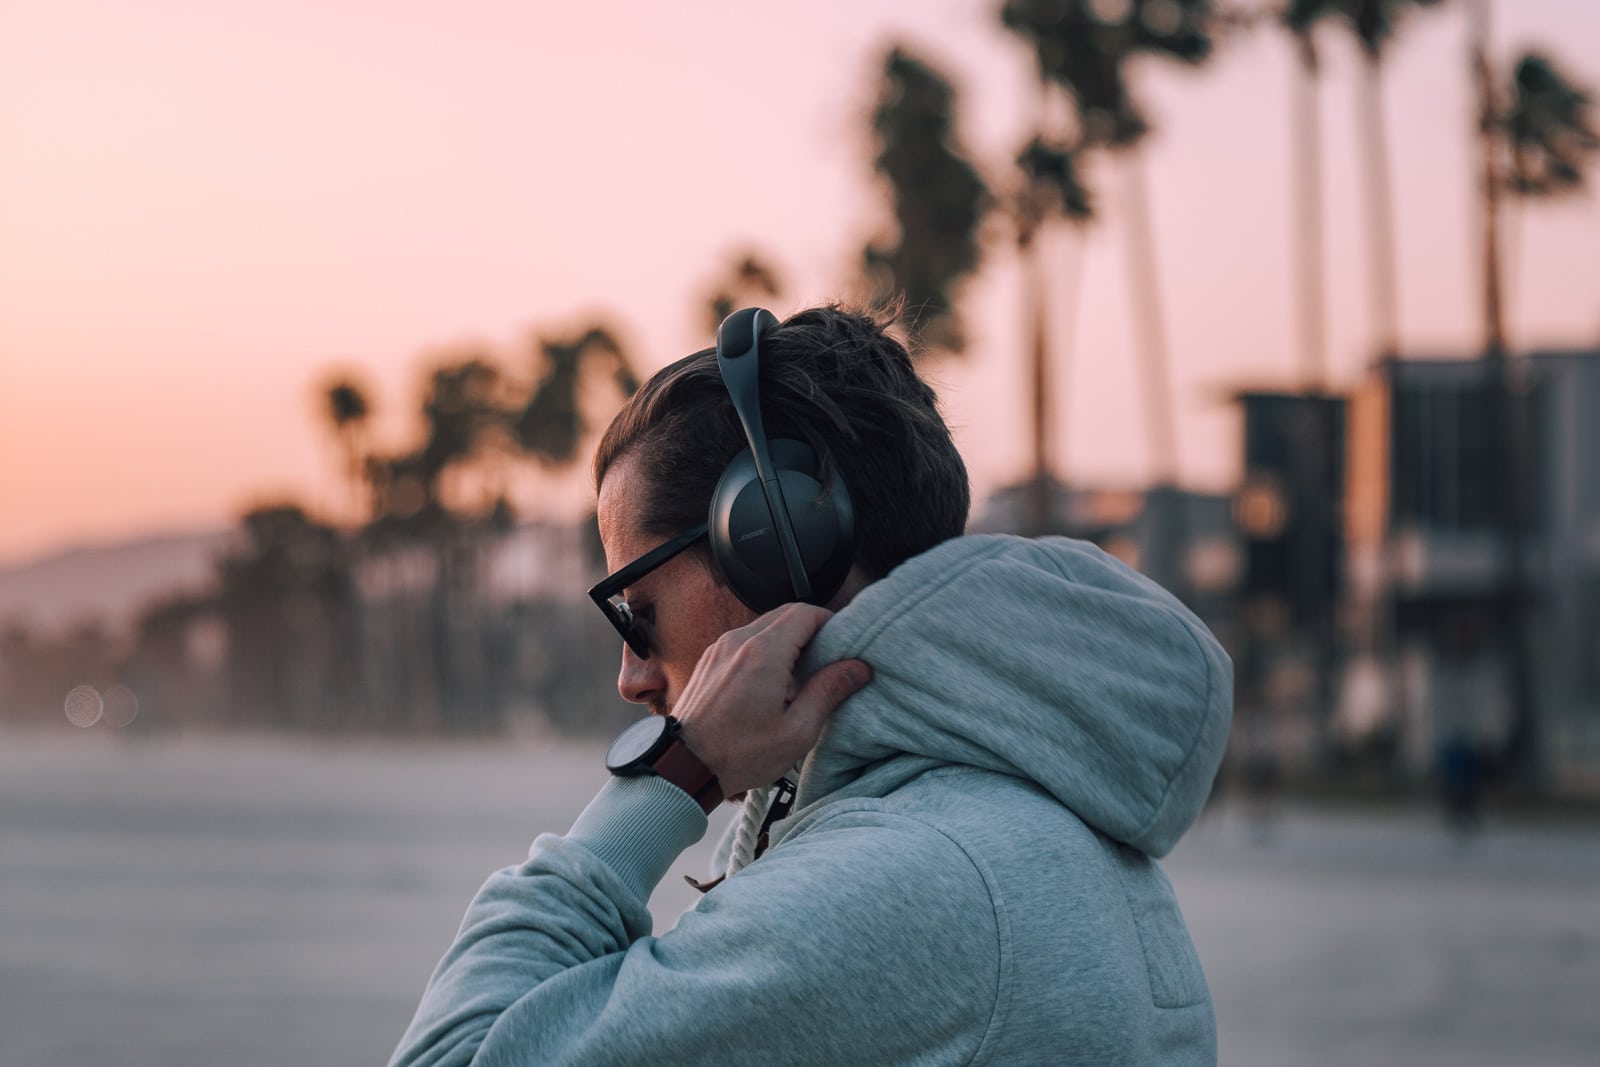 Bose 700 vs QC35: Which Headphones Are Better? -